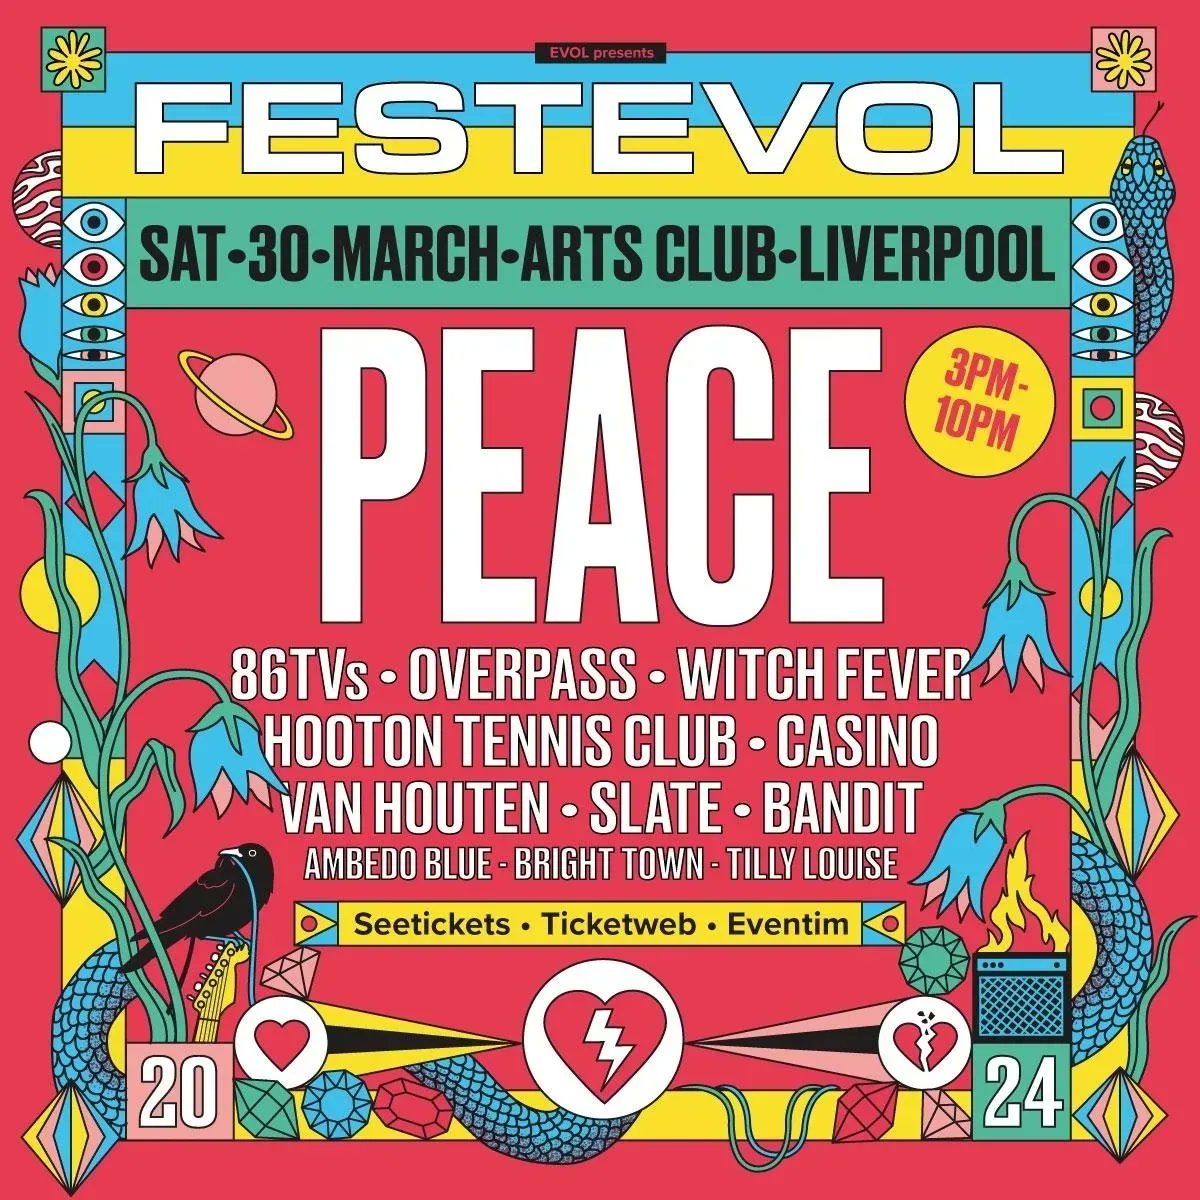 𝐓𝐎𝐌𝐎𝐑𝐑𝐎𝐖
The signature sound of @hootontennisclb will reverberate around @artsclublpool once more as they play their first set on a Liverpool stage in 8 yrs at #FestEvol24 all-dayer. On-stage playing songs old & new, 7pm in the Theatre 🔥

Tickets: seetickets.com/event/festevol…